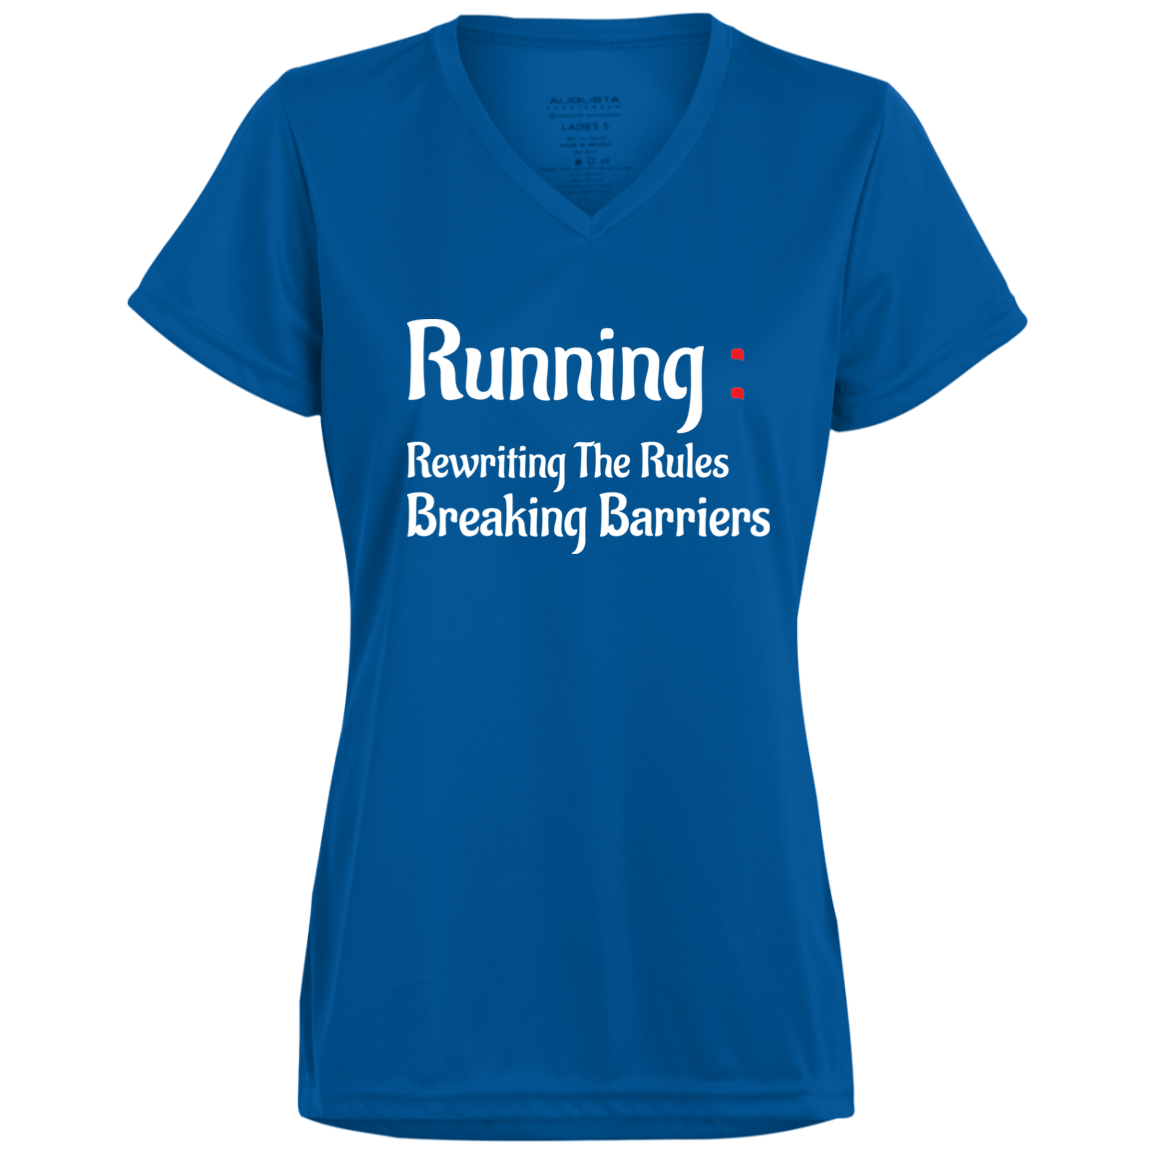 Women's Inspirational Top Running rewriting the rules, breaking barriers